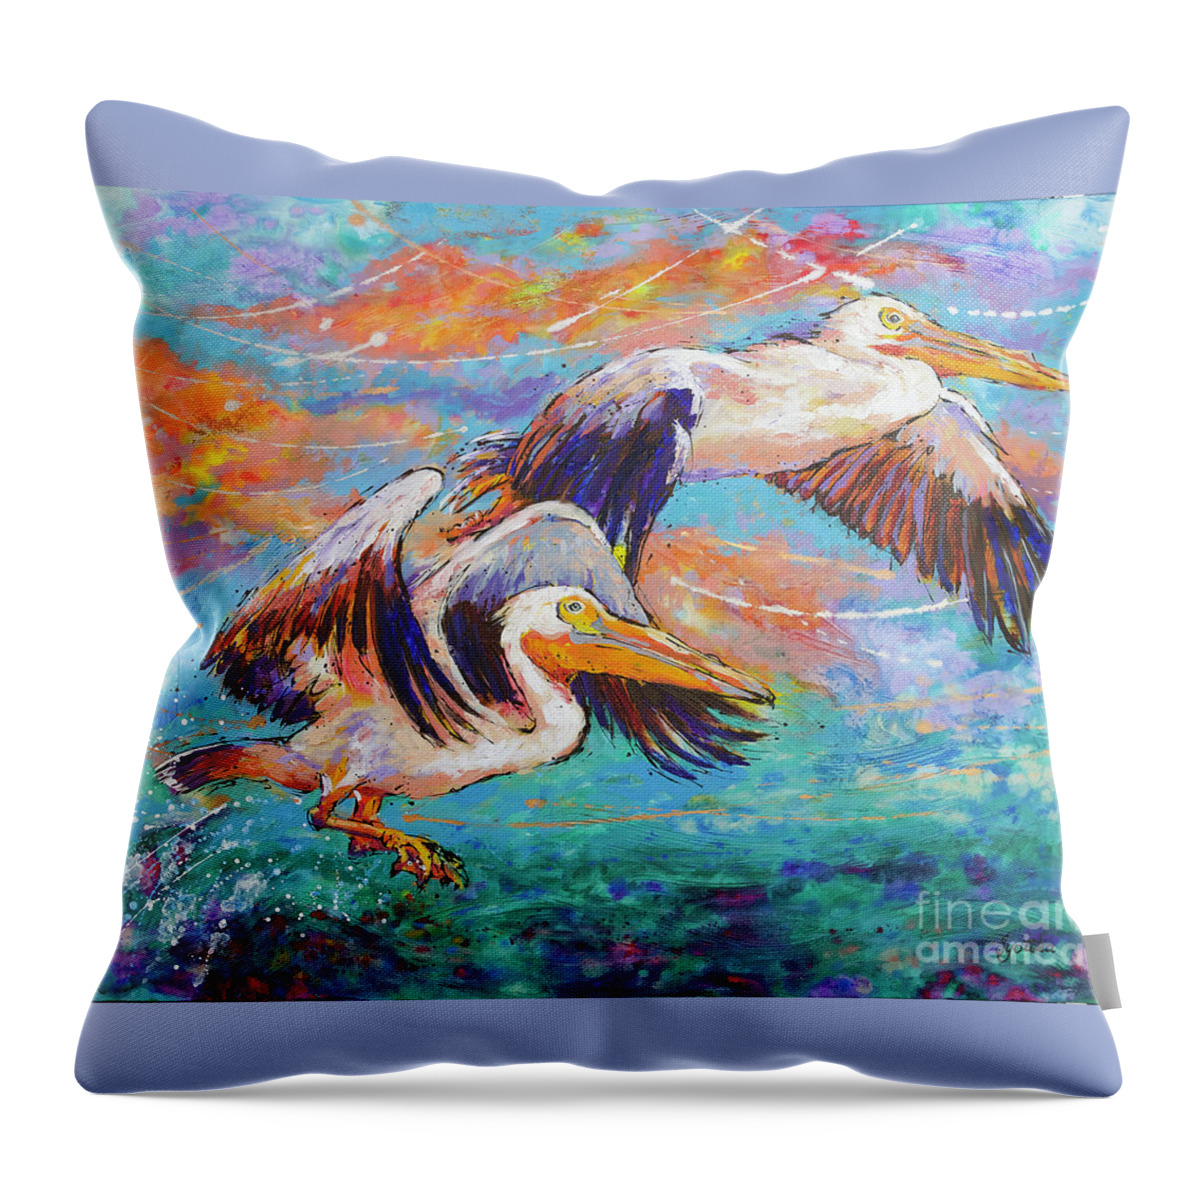  Throw Pillow featuring the painting Homeward Bound Pelicans by Jyotika Shroff